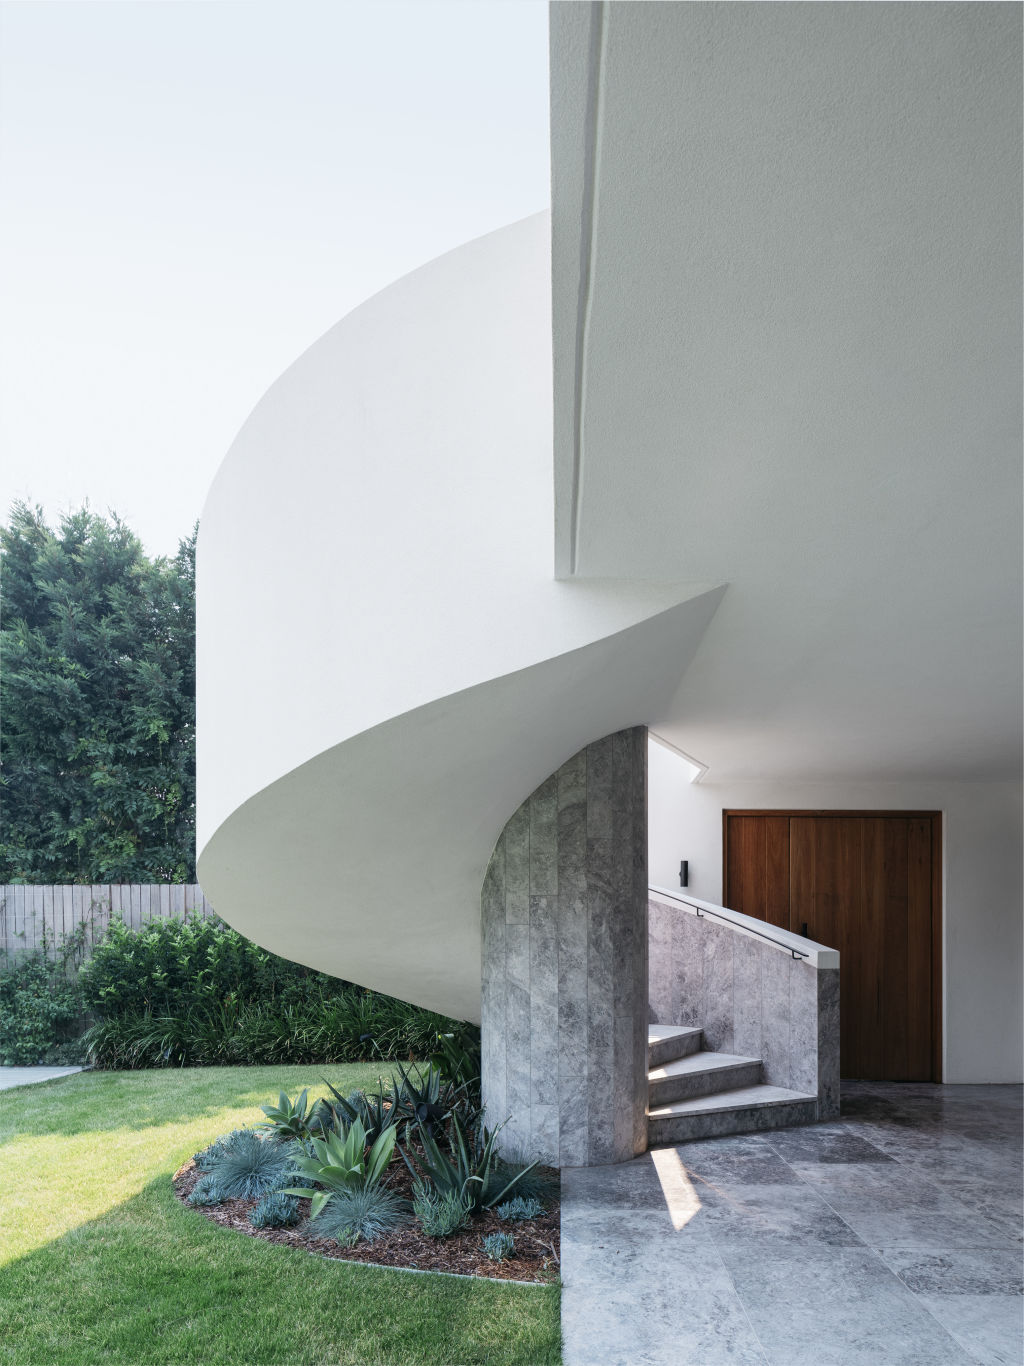 The home has a classic contemporary aesthetic. Photo: Felix Forest